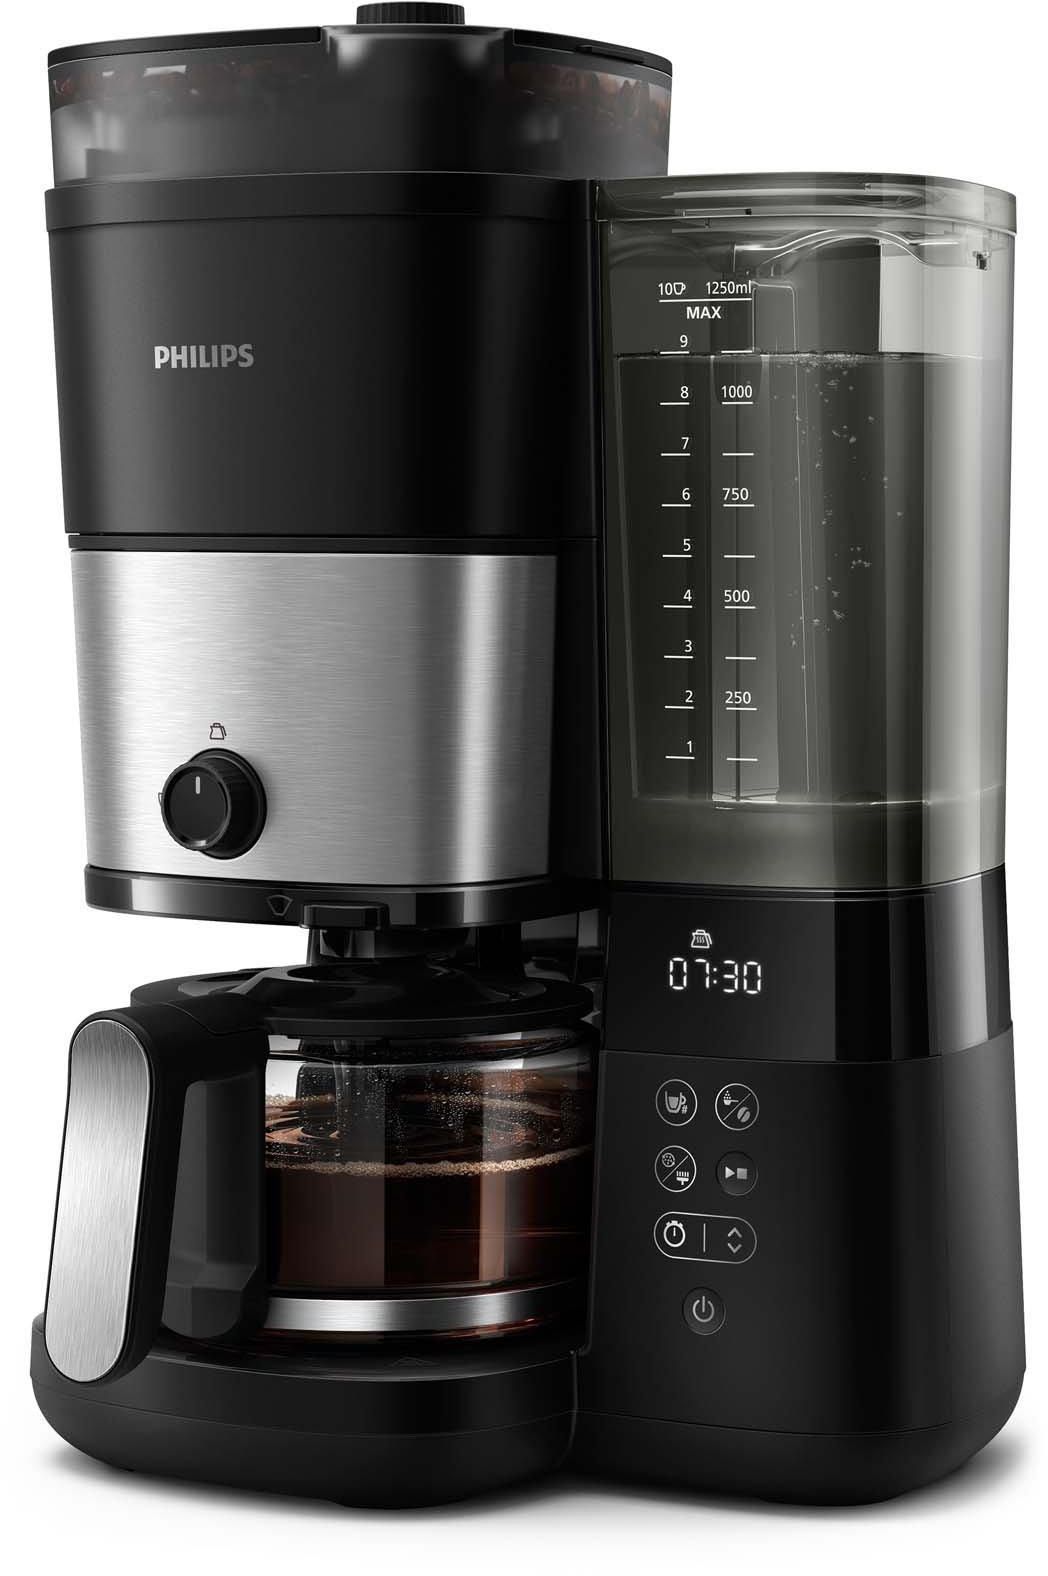 Philips, All-in-1 Coffee maker with built-in grinder, 1.25L